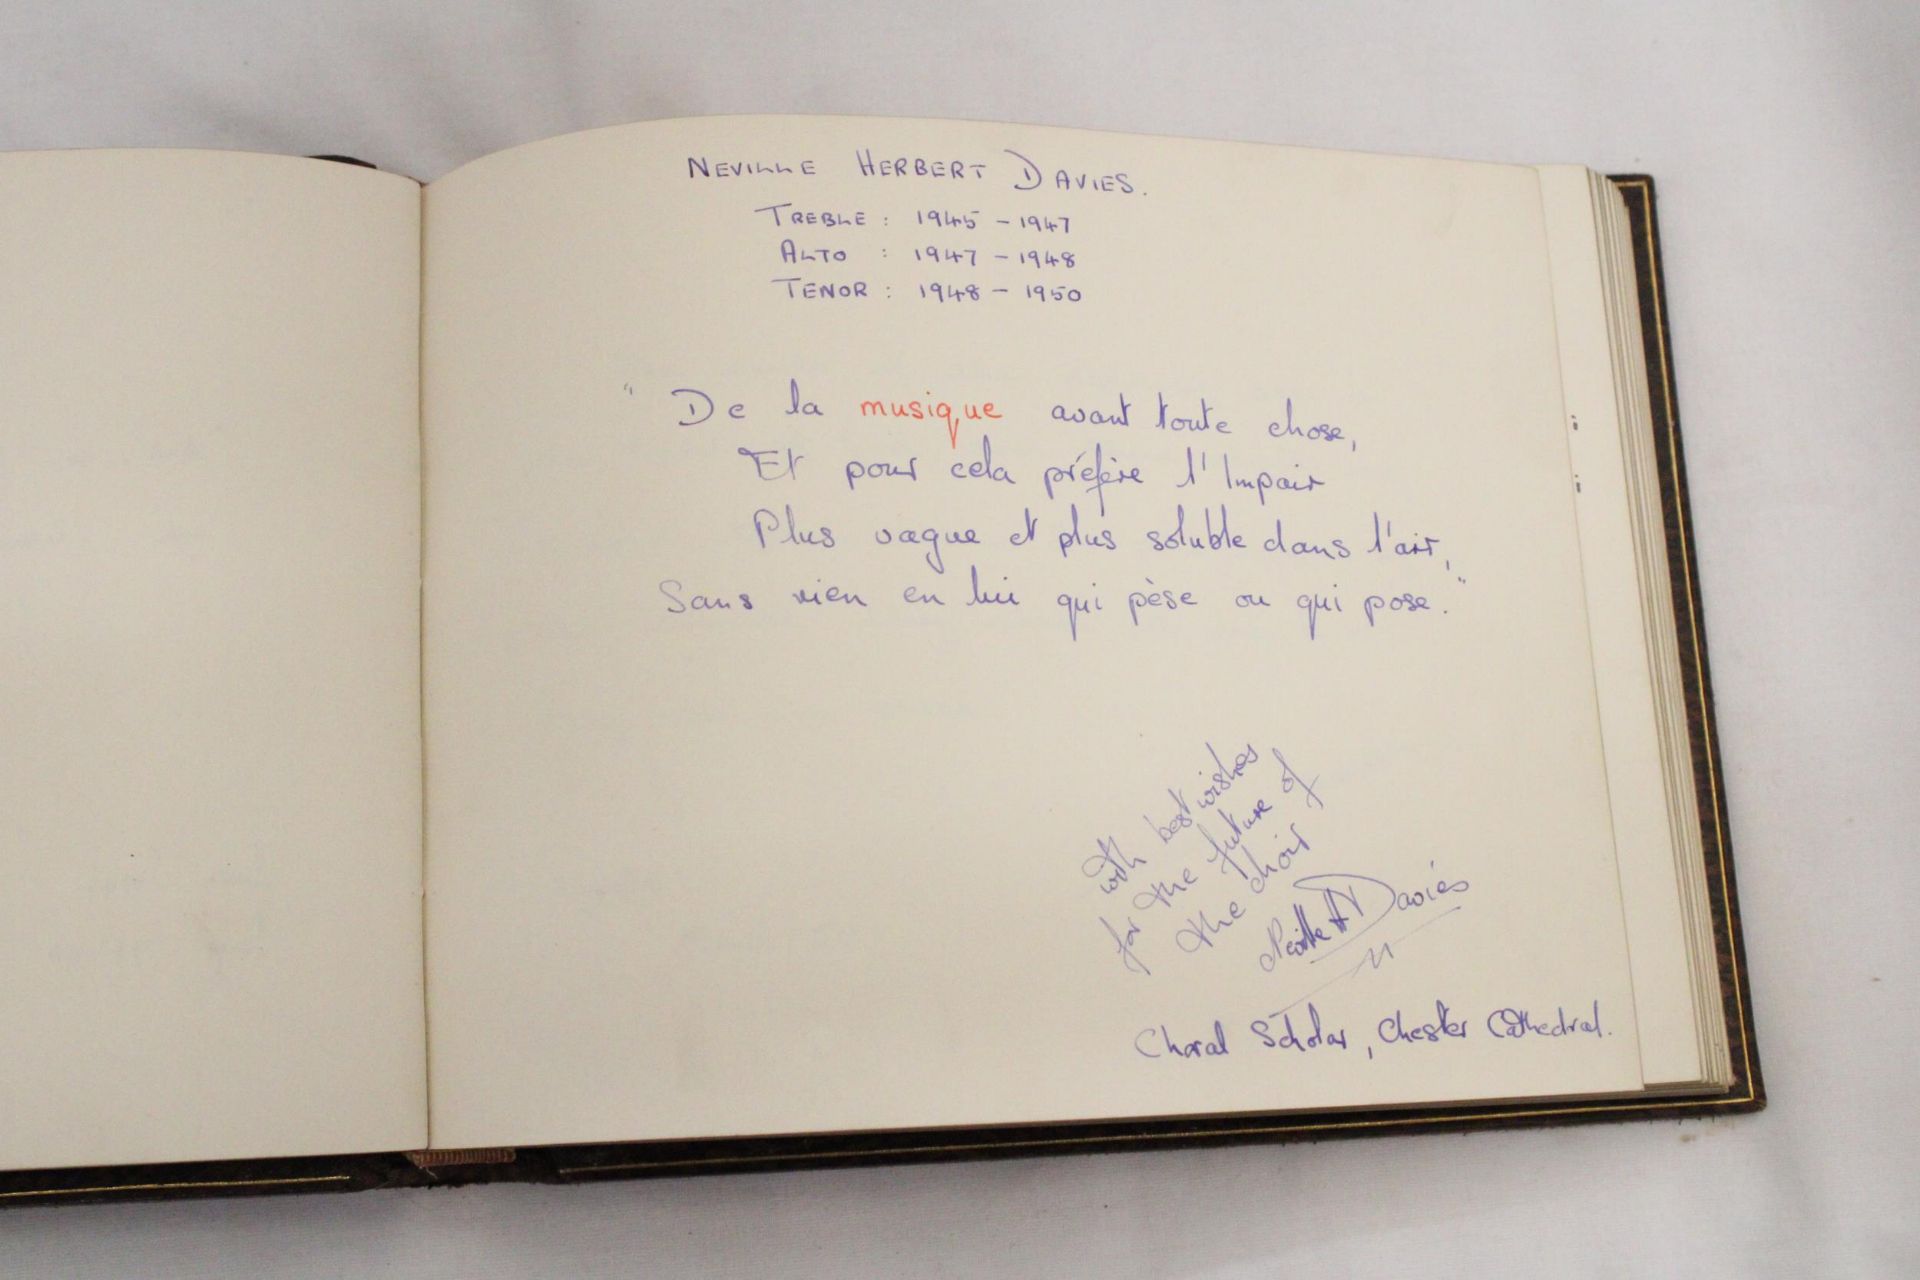 A VINTAGE LEATHER BOUND AUTOGRAPH BOOK FROM THE 1940'S WITH MOSTLY RELIGIOUS ENTRIES - Image 3 of 6